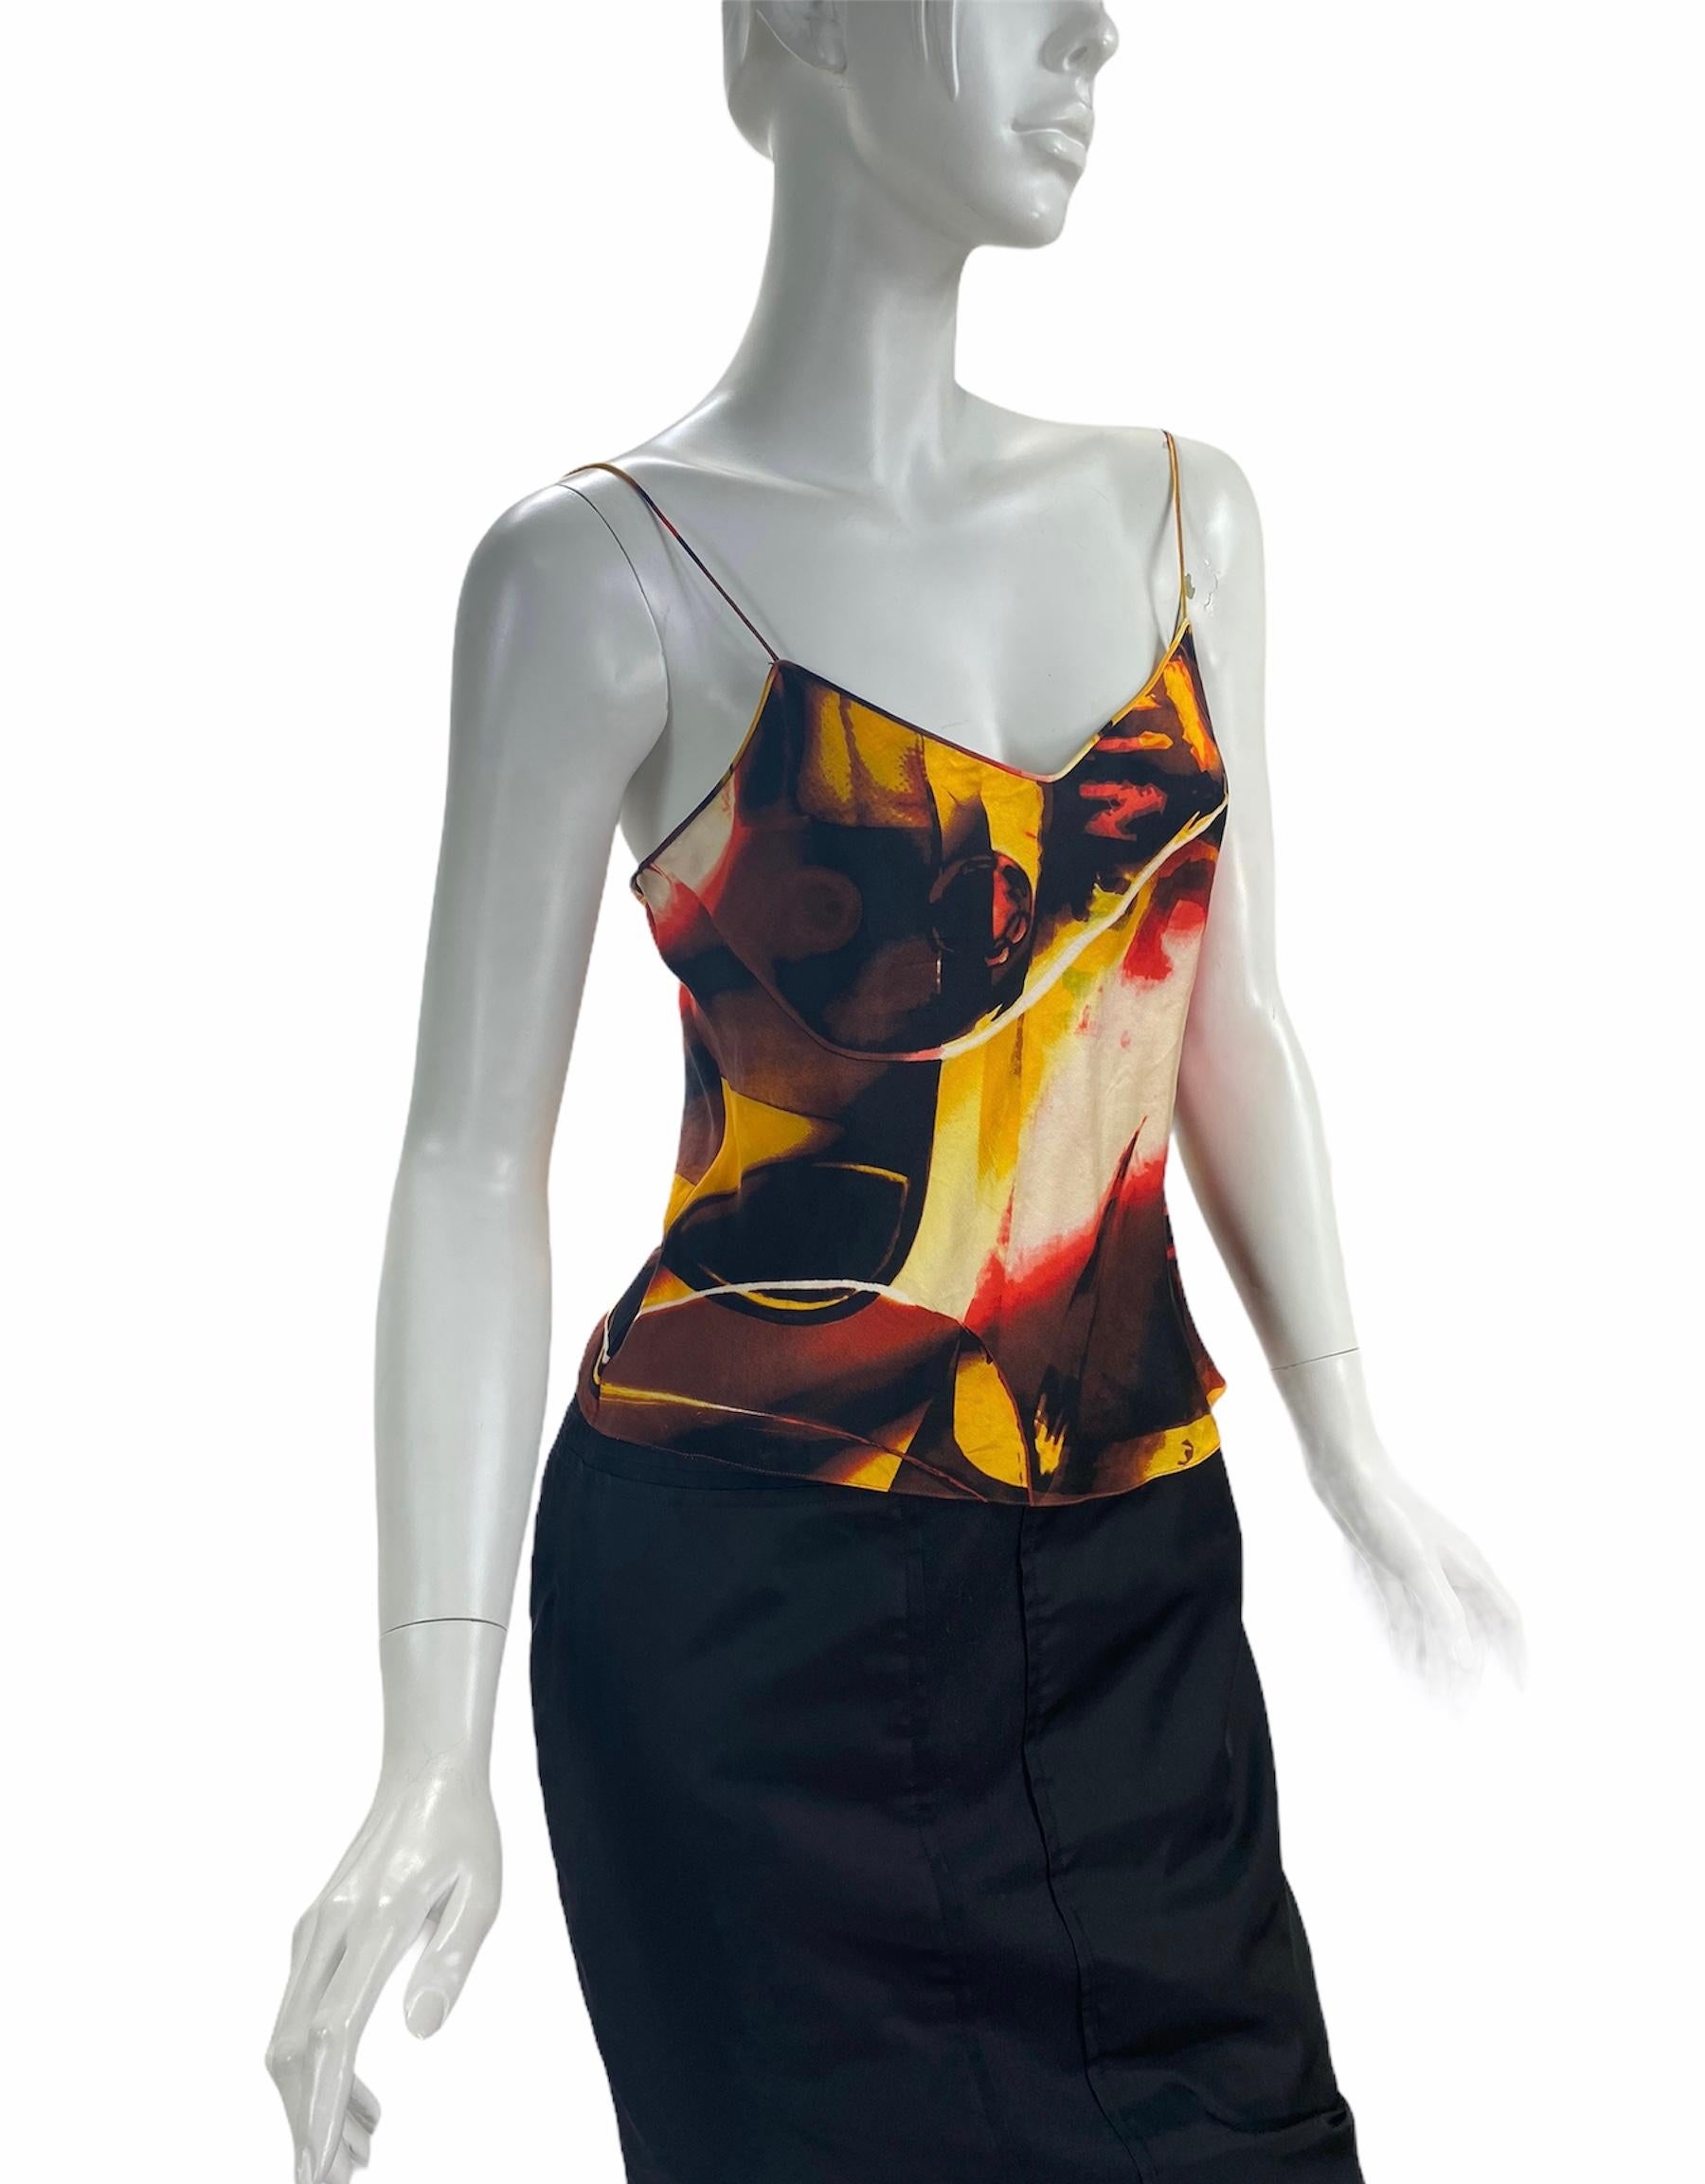 Vintage John Galliano for Christian Dior Silk Cami Top
Early 2000-s
Multicolored Silk Top, Spaghetti Straps, Slip-on Style.
Measurements: Length - 21 inch, Bust - 32/34